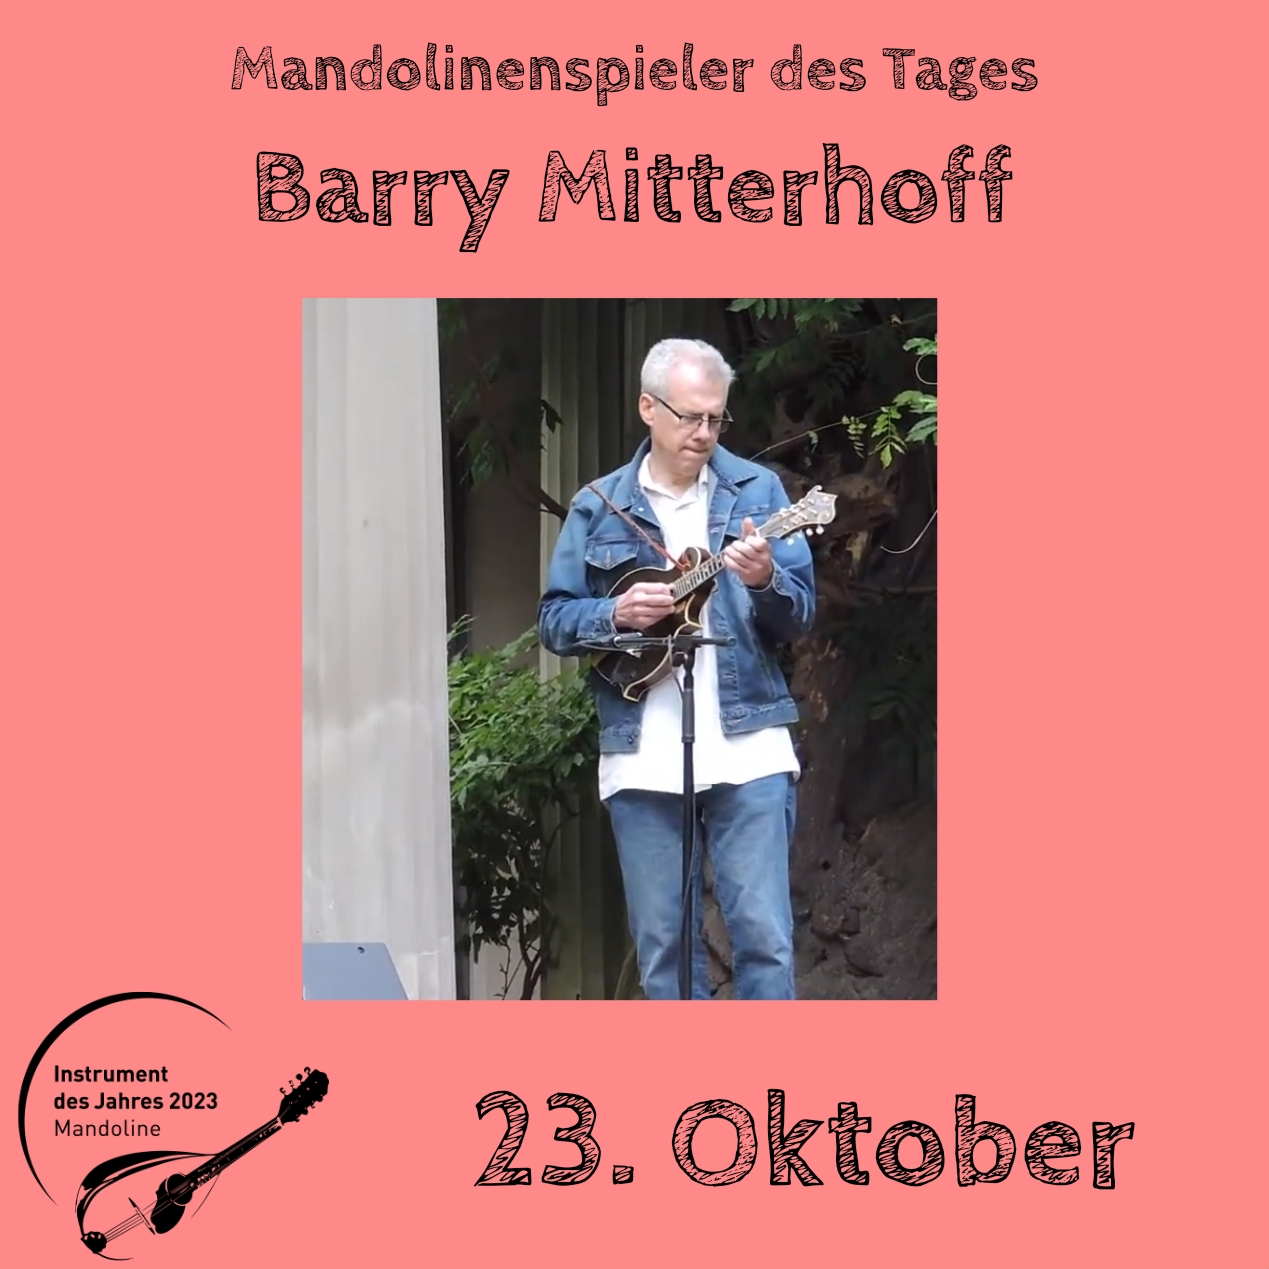 You are currently viewing 23. Oktober – Barry Mitterhoff